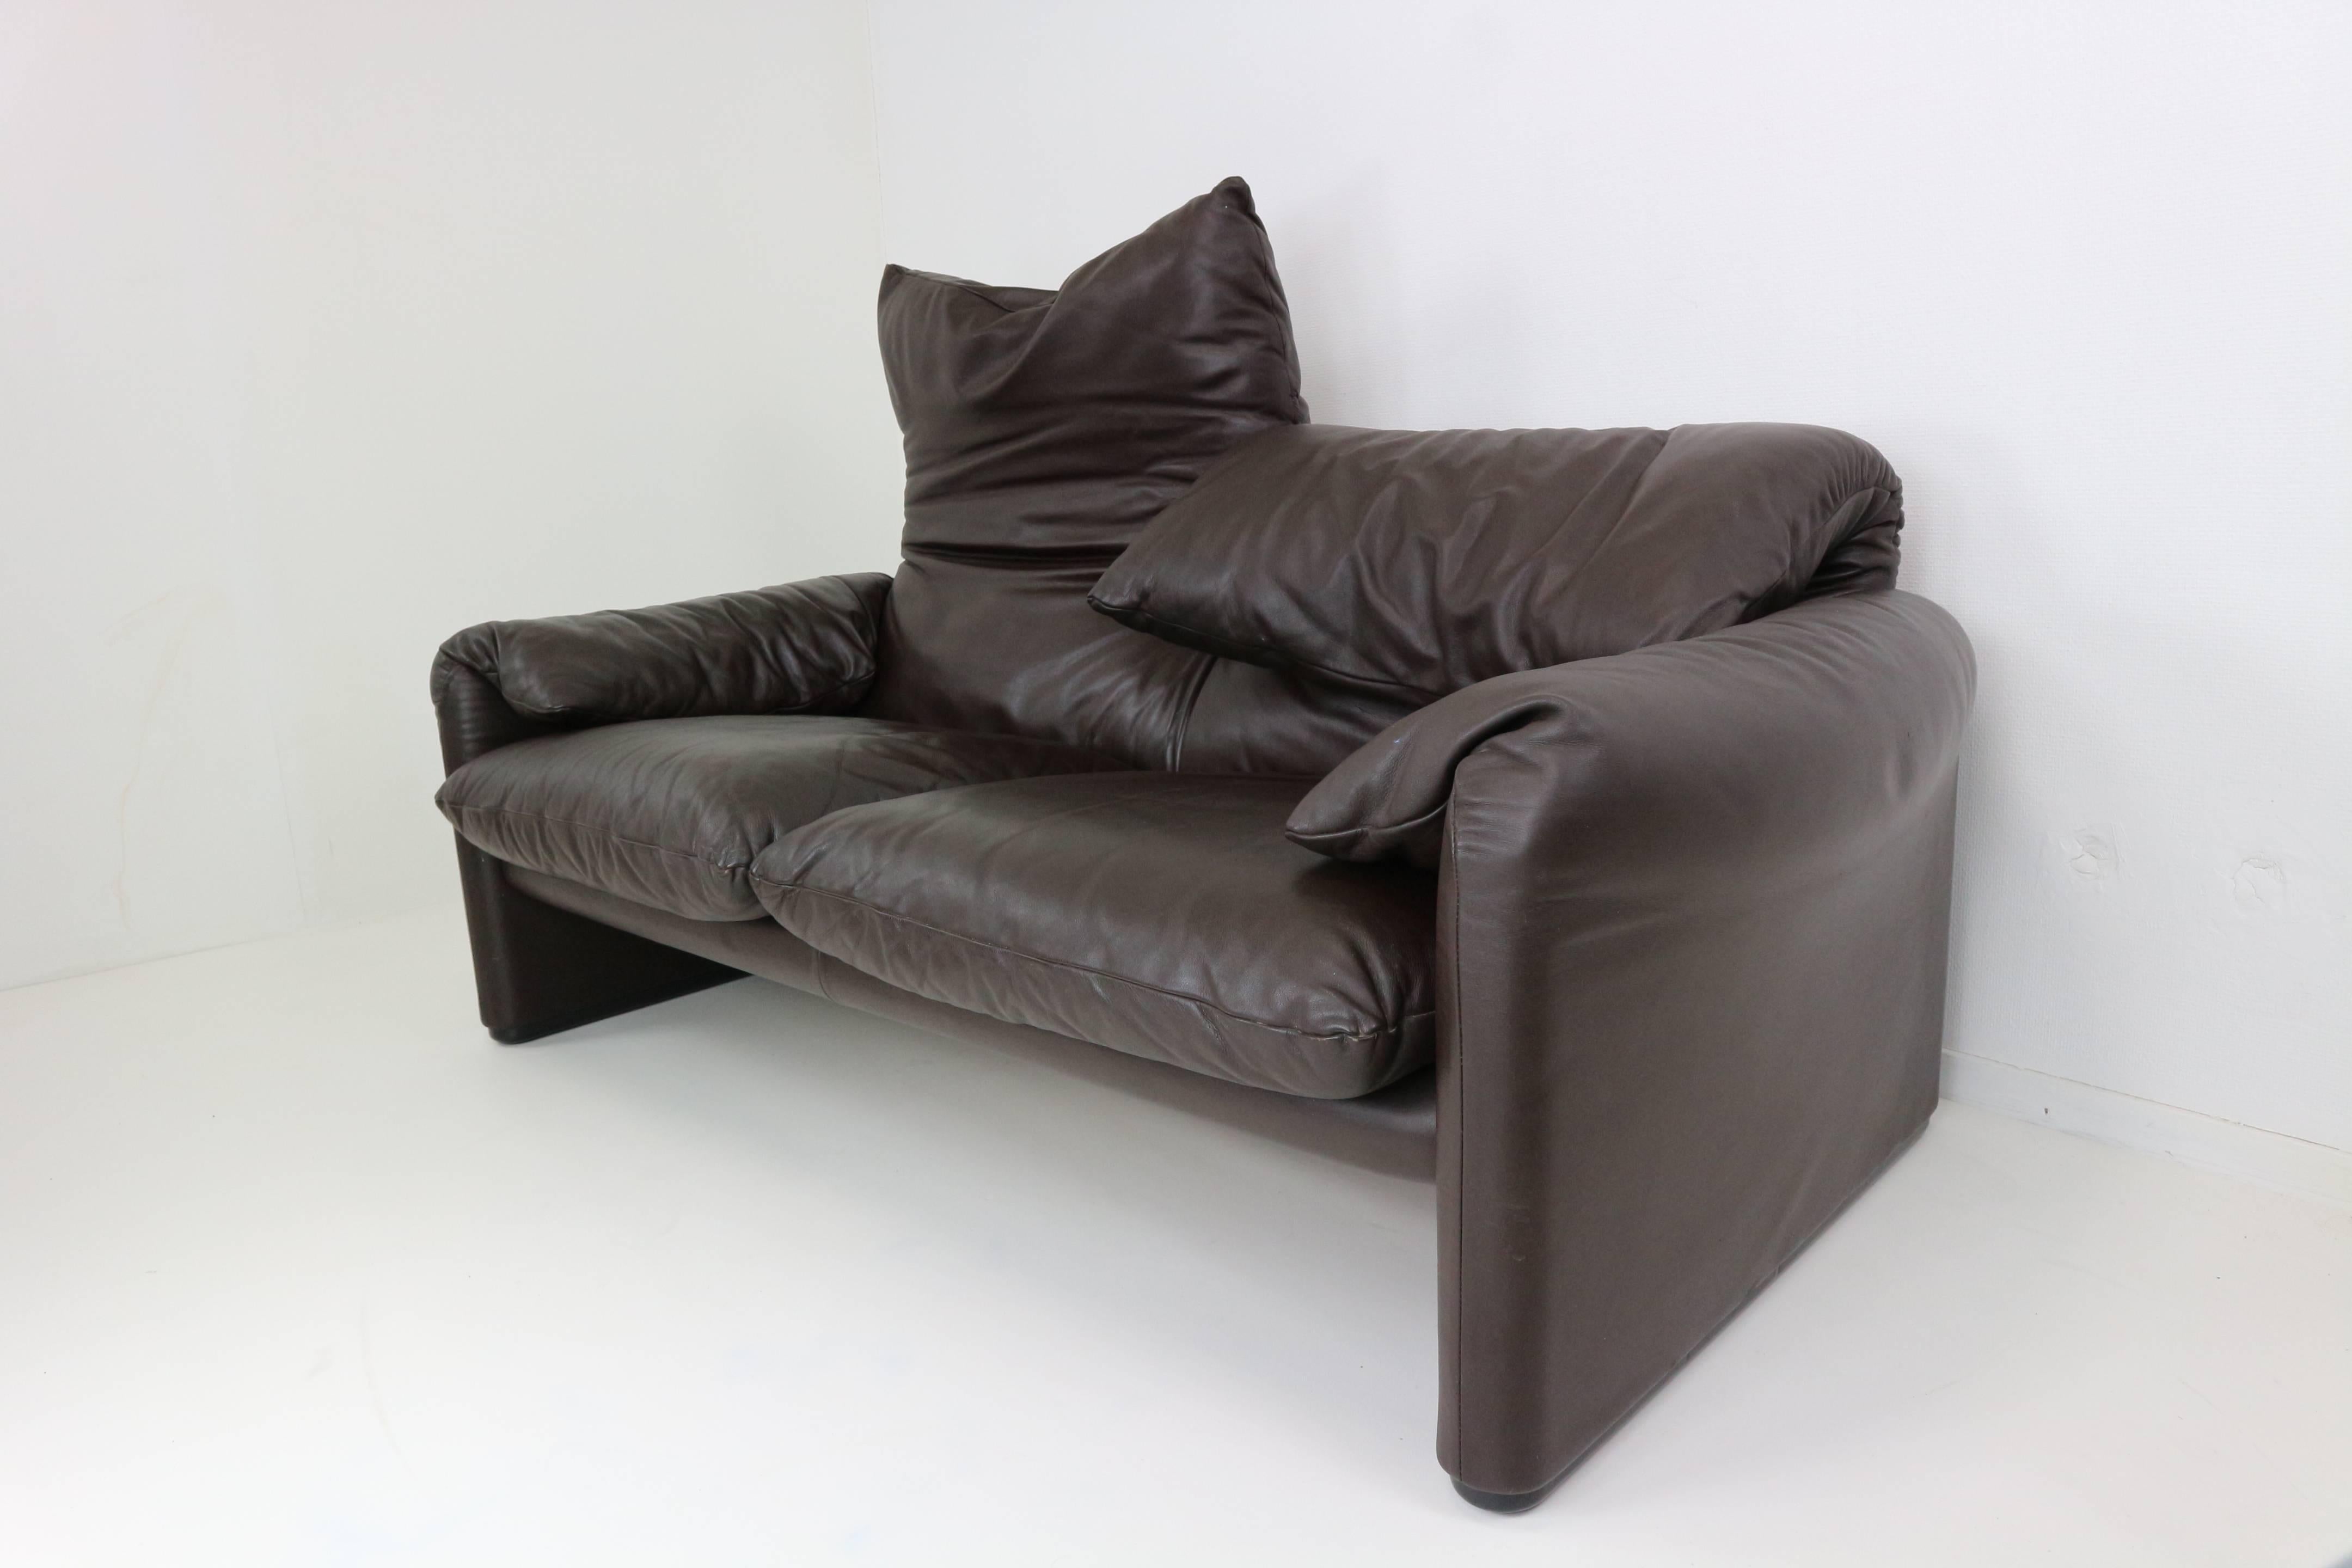 Adjustable sofa in real dark brown leather. Choose between a high or low back height and fold the arms to desired width. Also available as a set, we have two sofa's in stock.

We ship worldwide, do not hesitate to contact us. We inform you about the